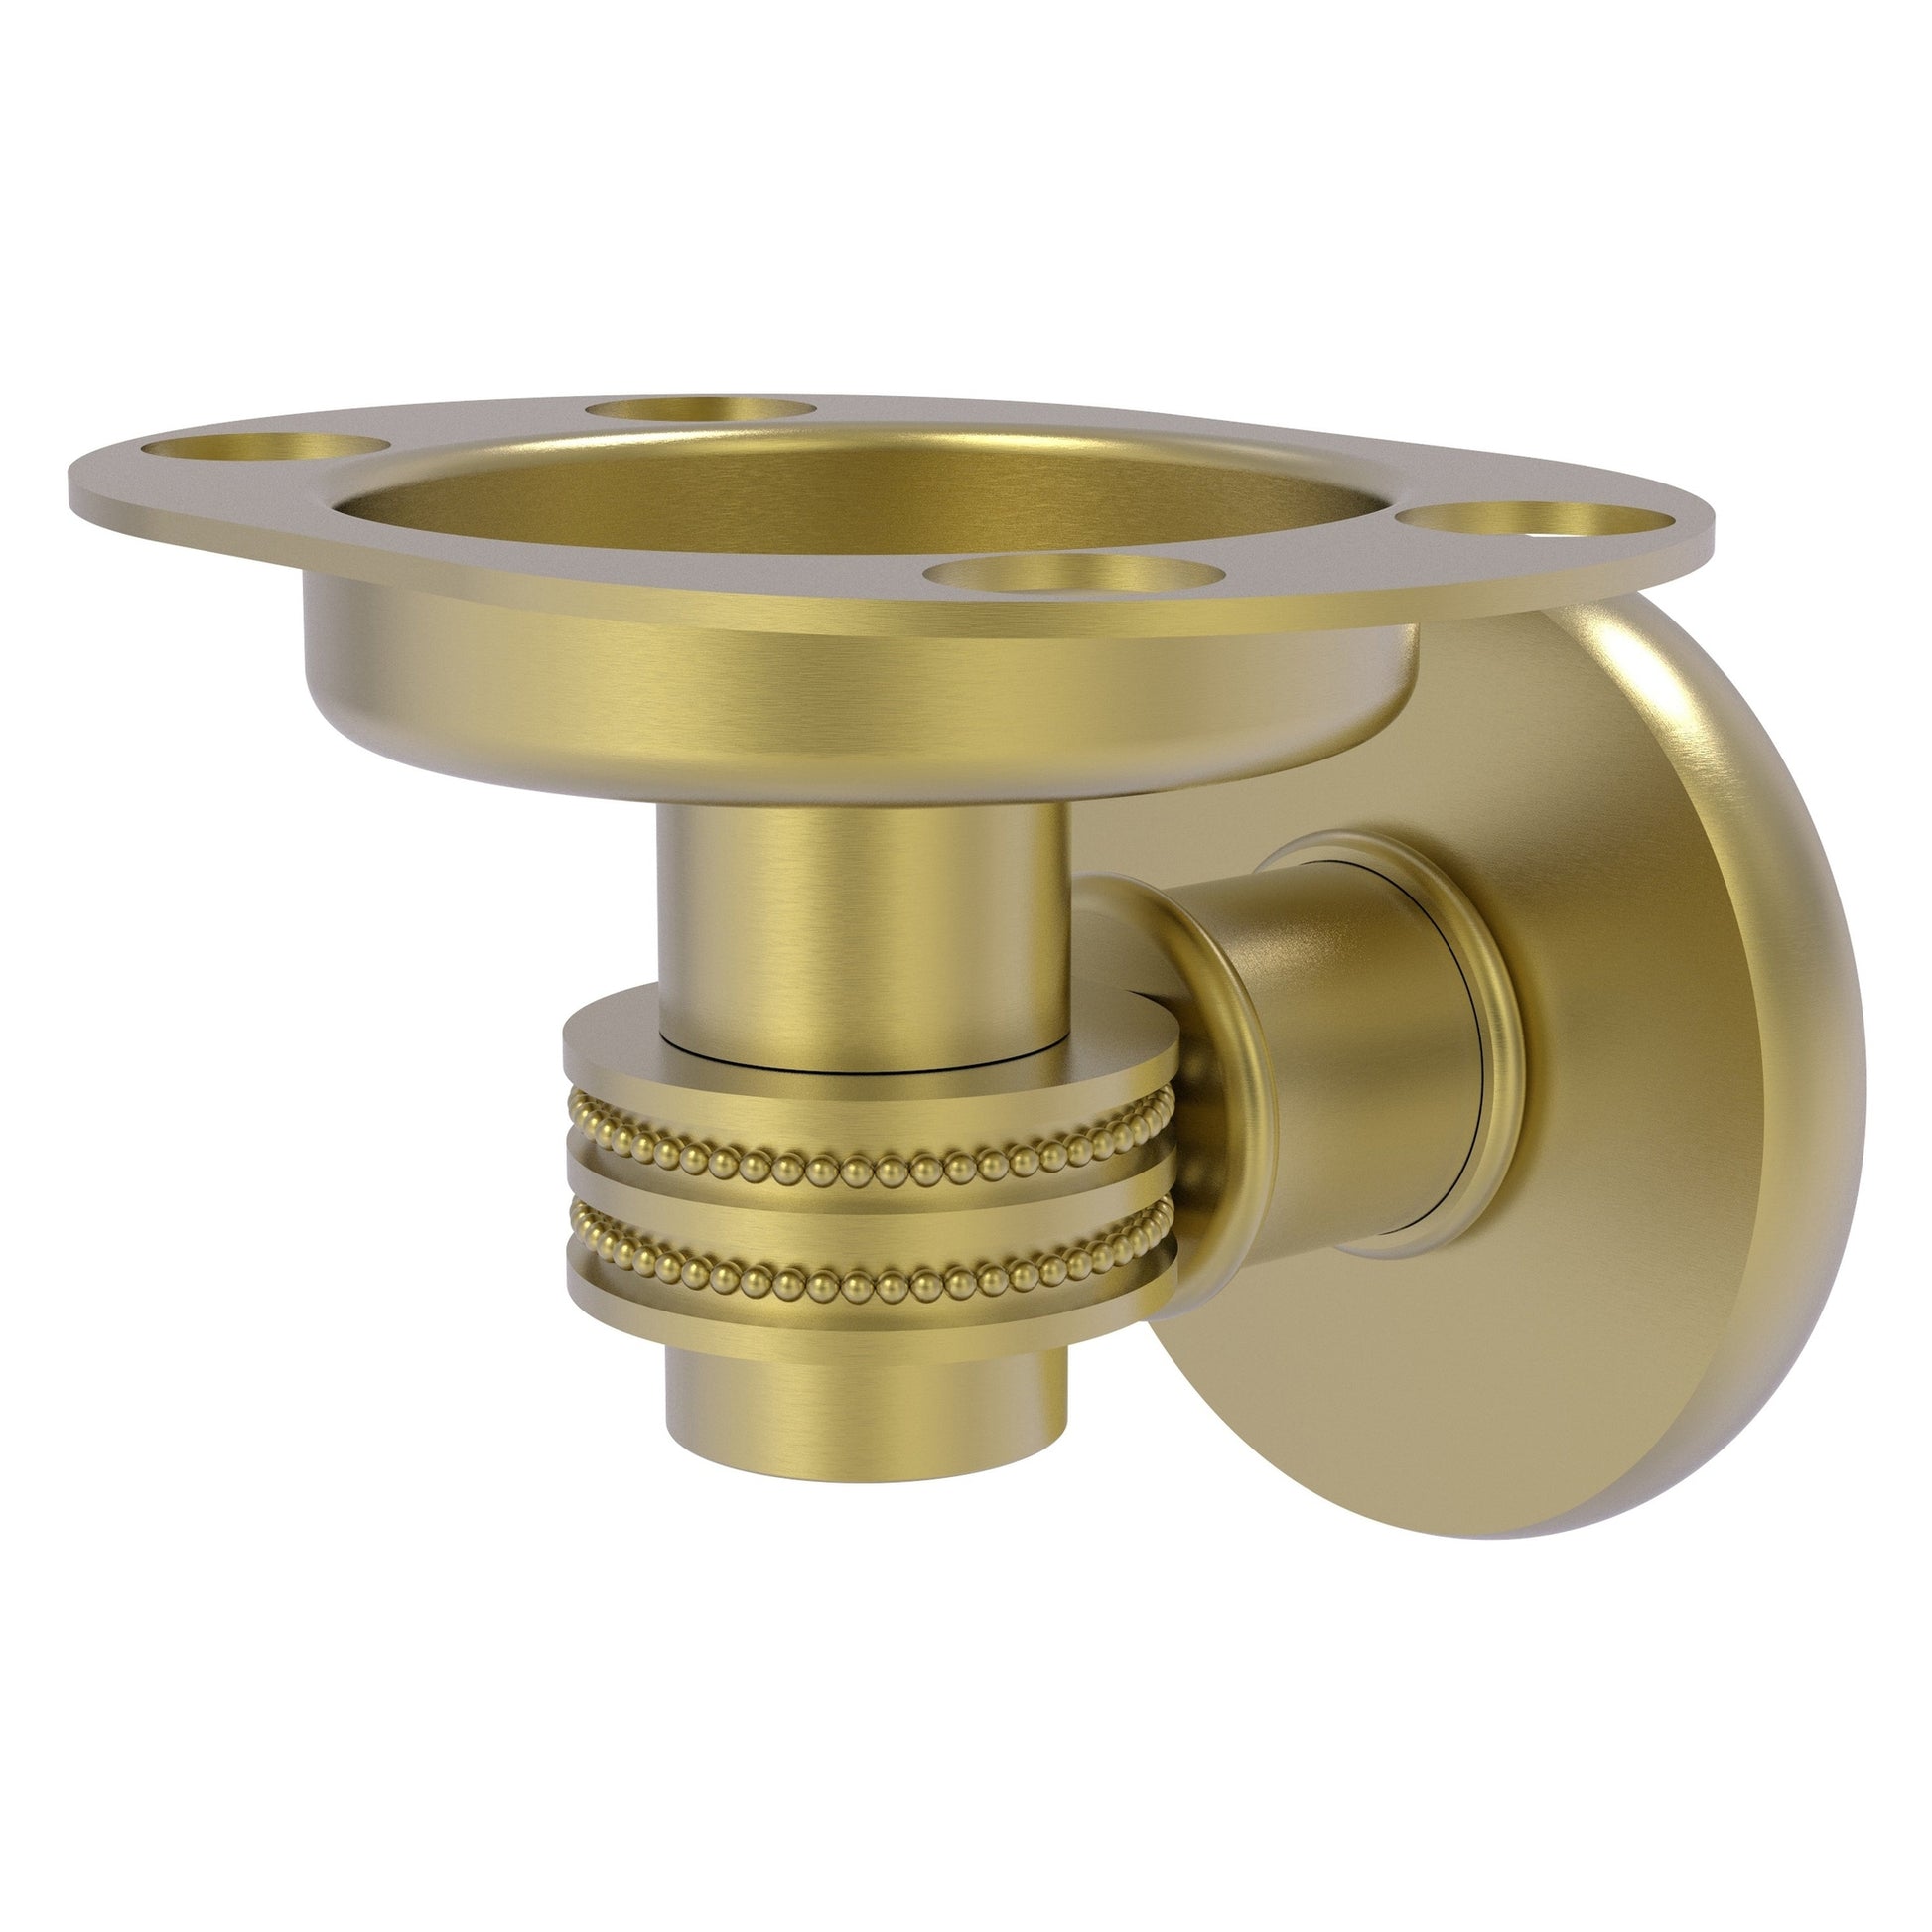 Allied Brass Continental 4.5" x 3.5" Satin Brass Solid Brass Tumbler and Toothbrush Holder with Dotted Accents